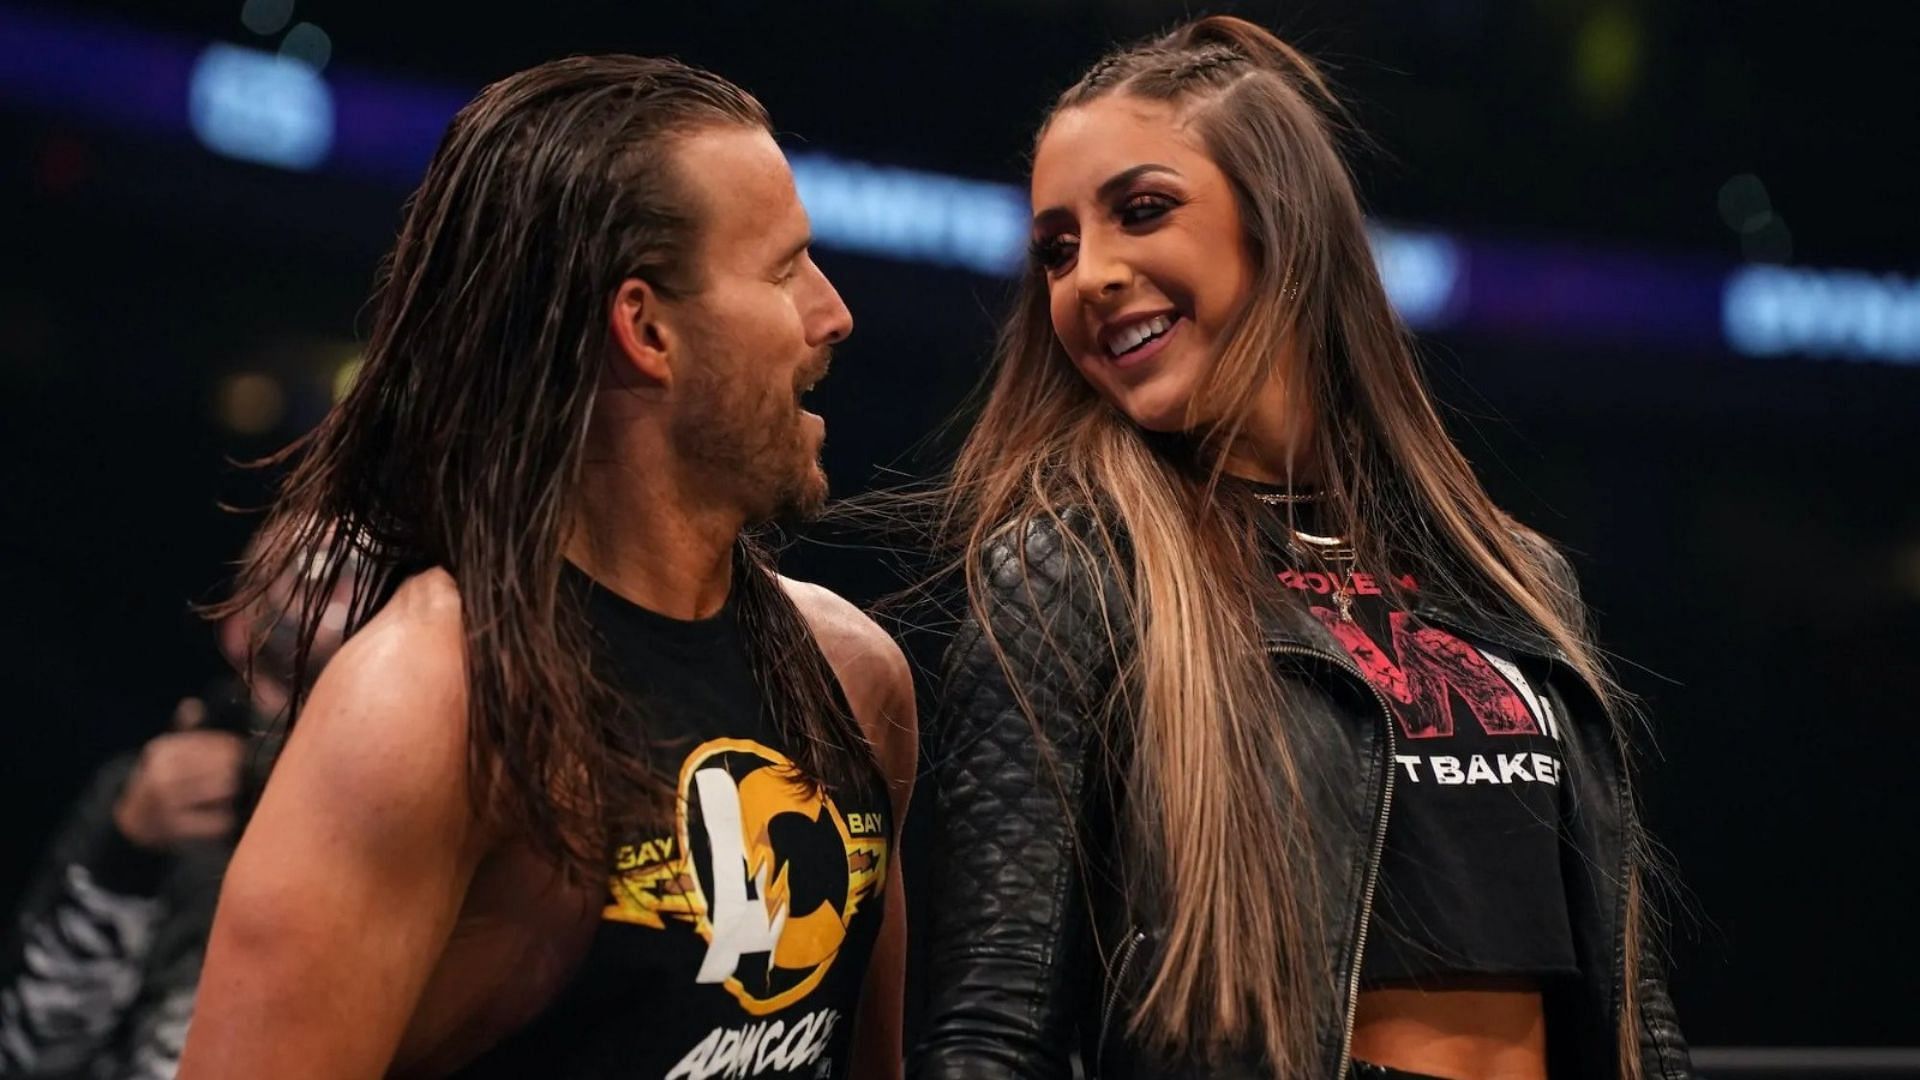 Adam Cole and Britt Baker are real-life partners, and AEW stars